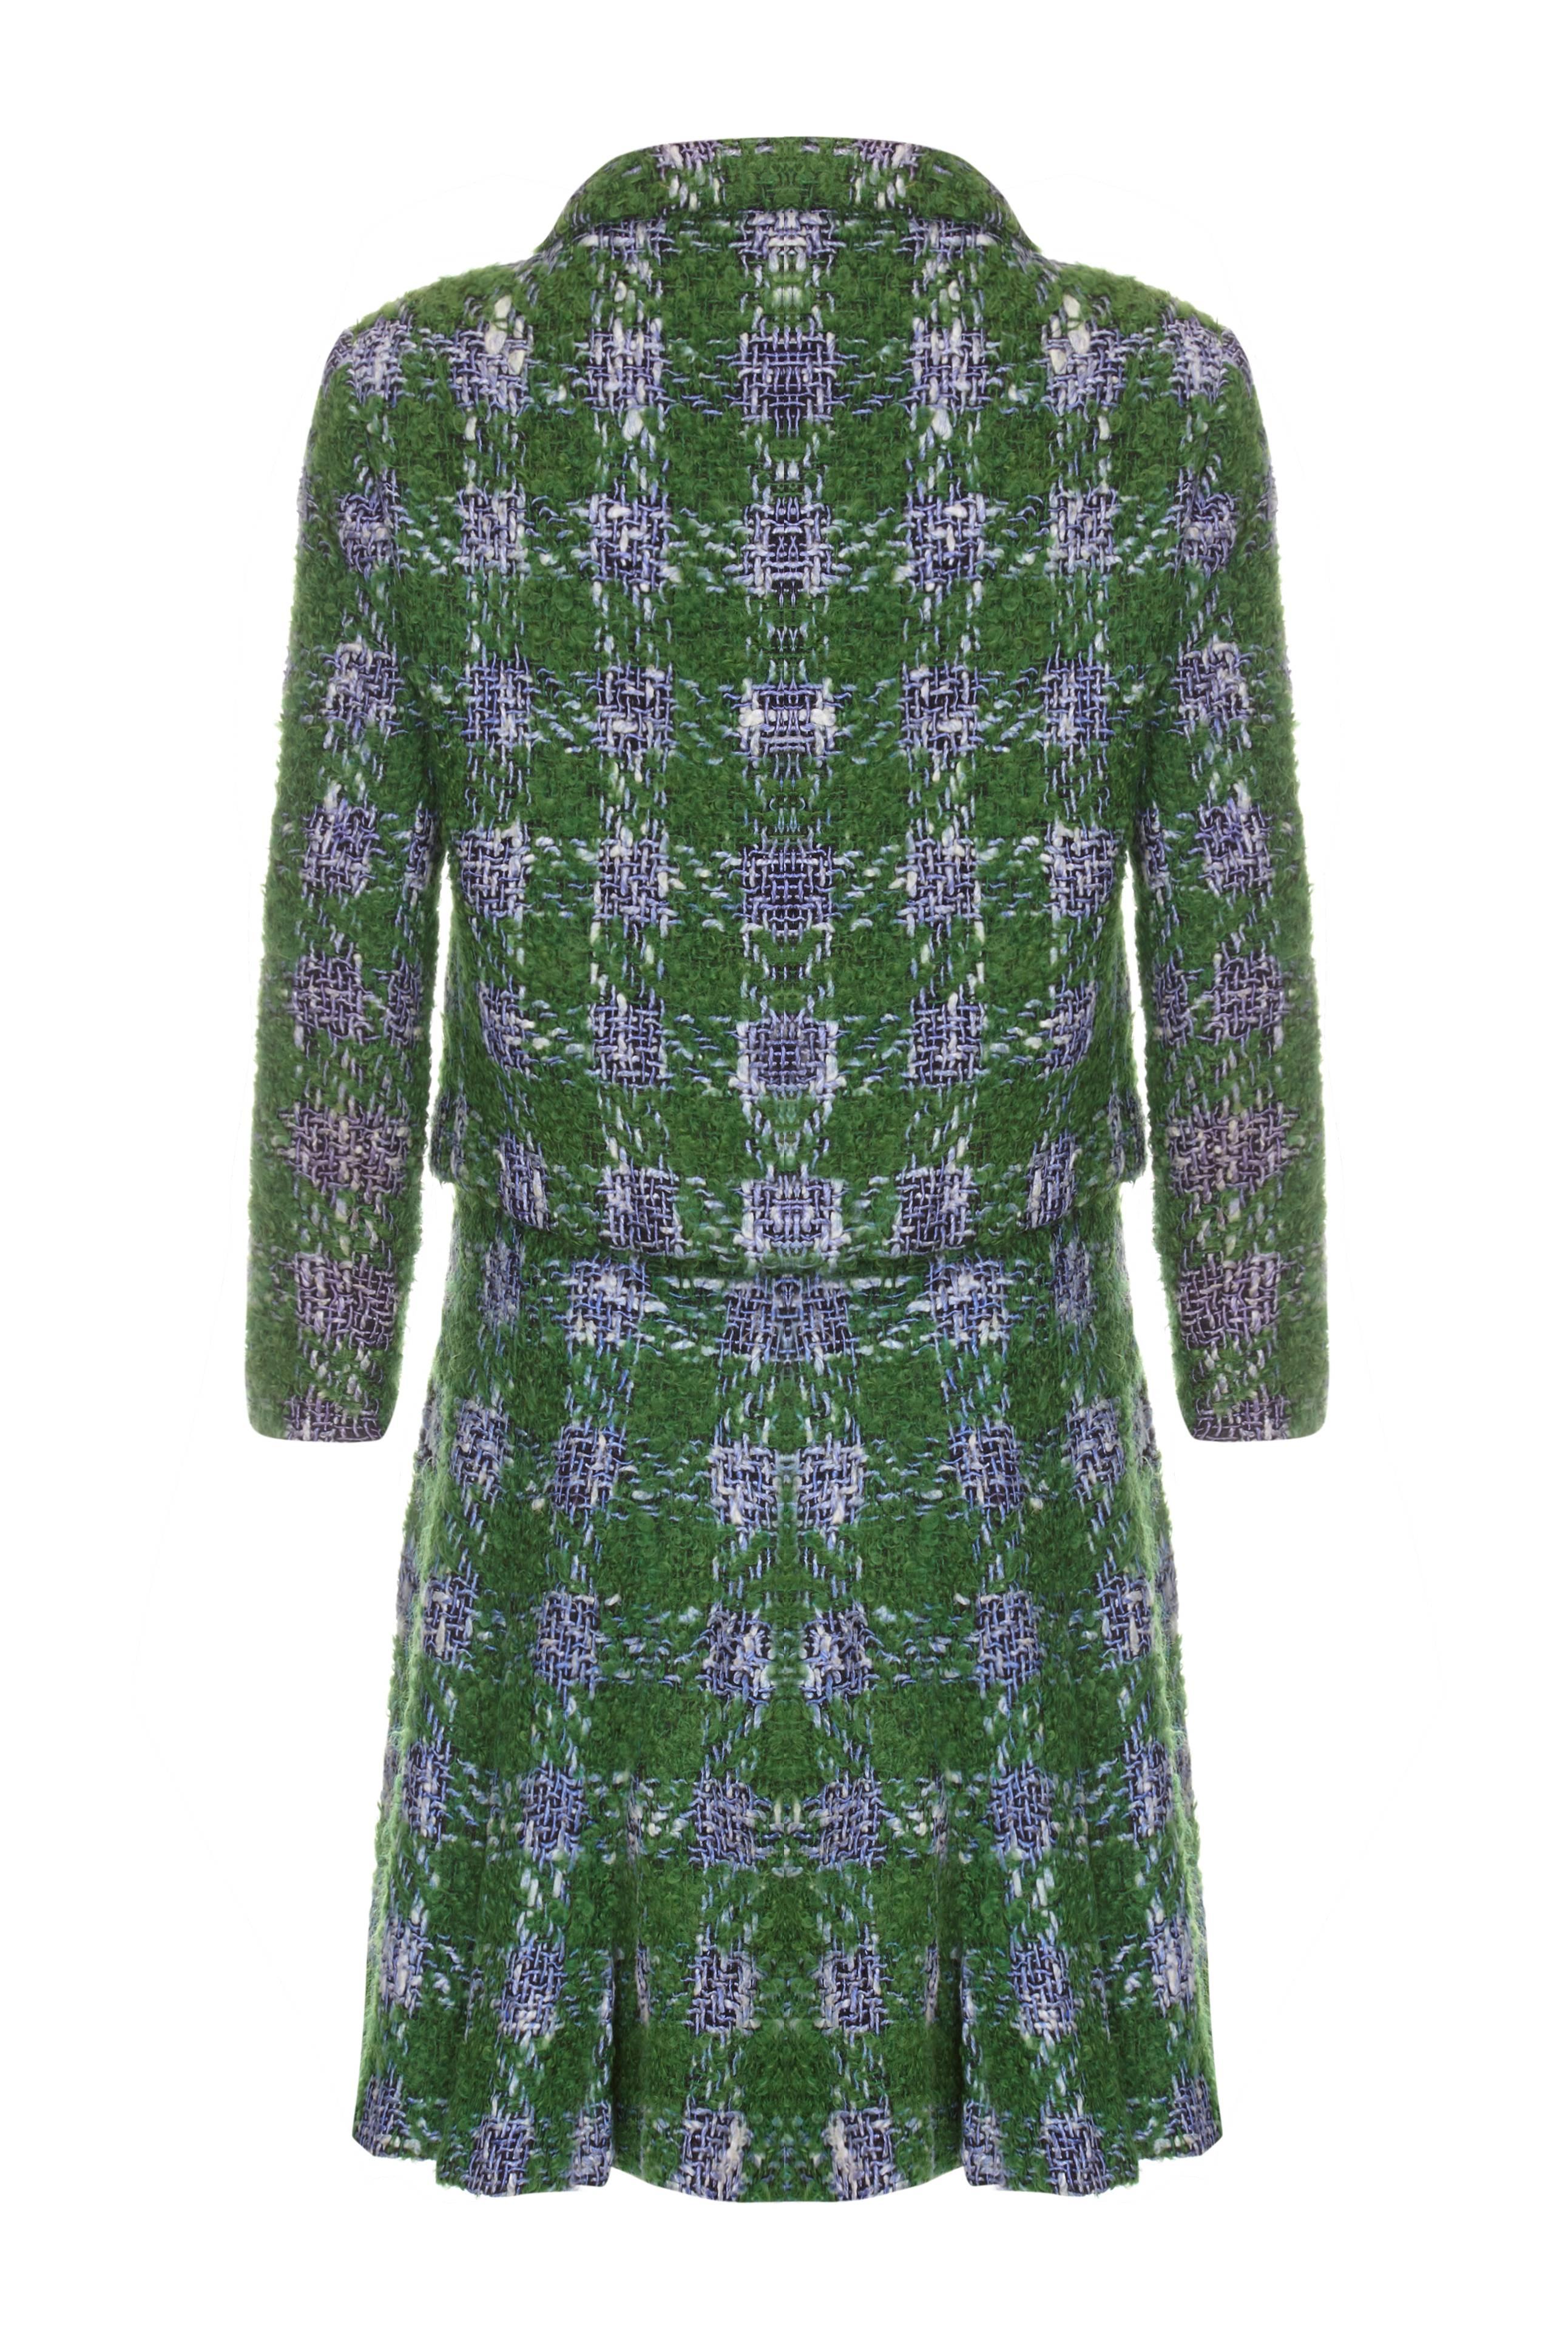 Beautiful vintage 1960s skirt suit from Bonwit Teller in a lovely textured green wool with blue and white yarns creating a check pattern.   The skirt is flared with pleats from the hip and fastens at the side with a zip.  The jacket is fully lined